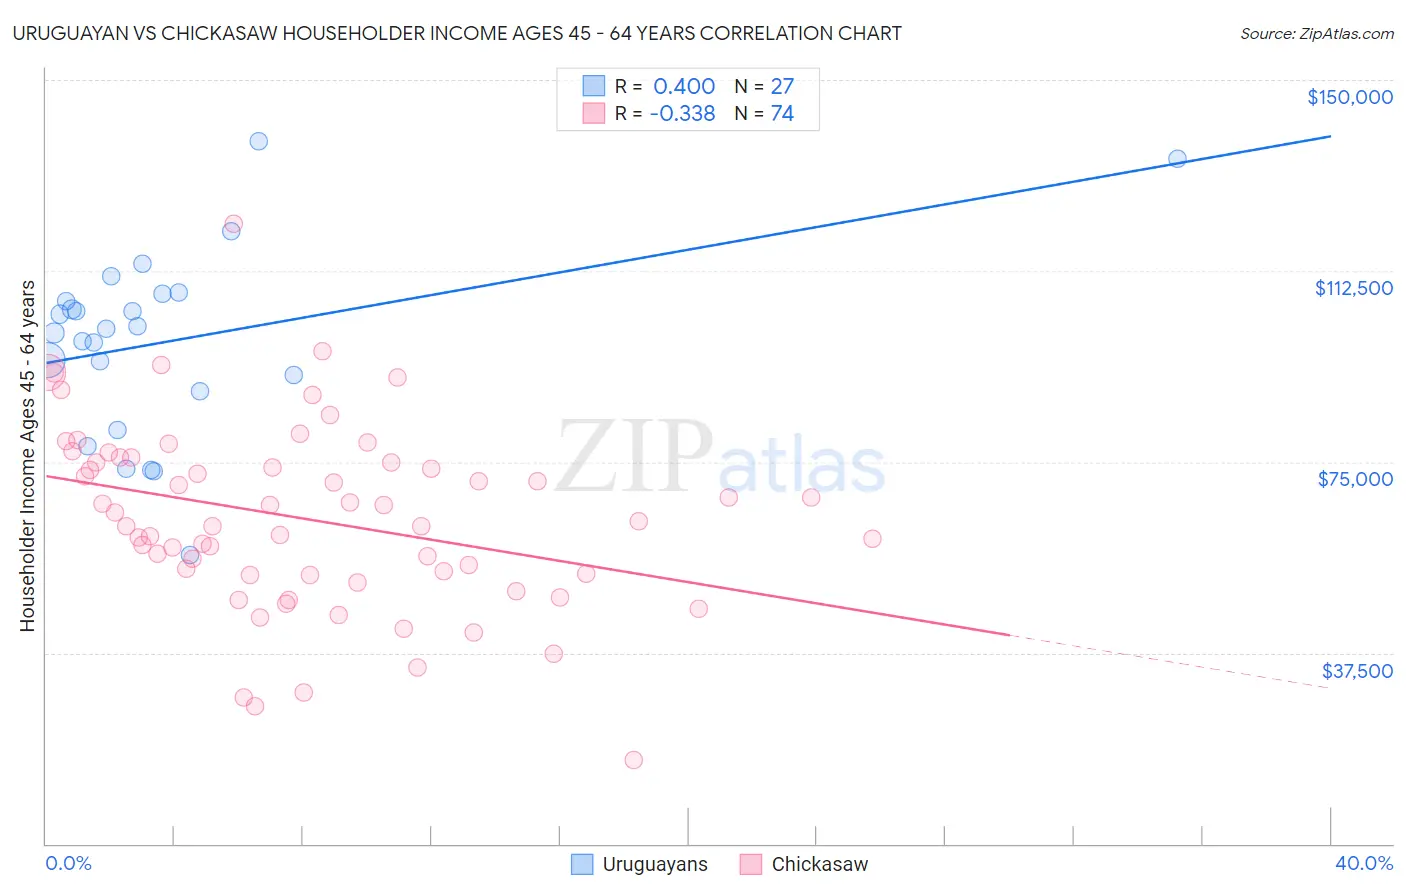 Uruguayan vs Chickasaw Householder Income Ages 45 - 64 years